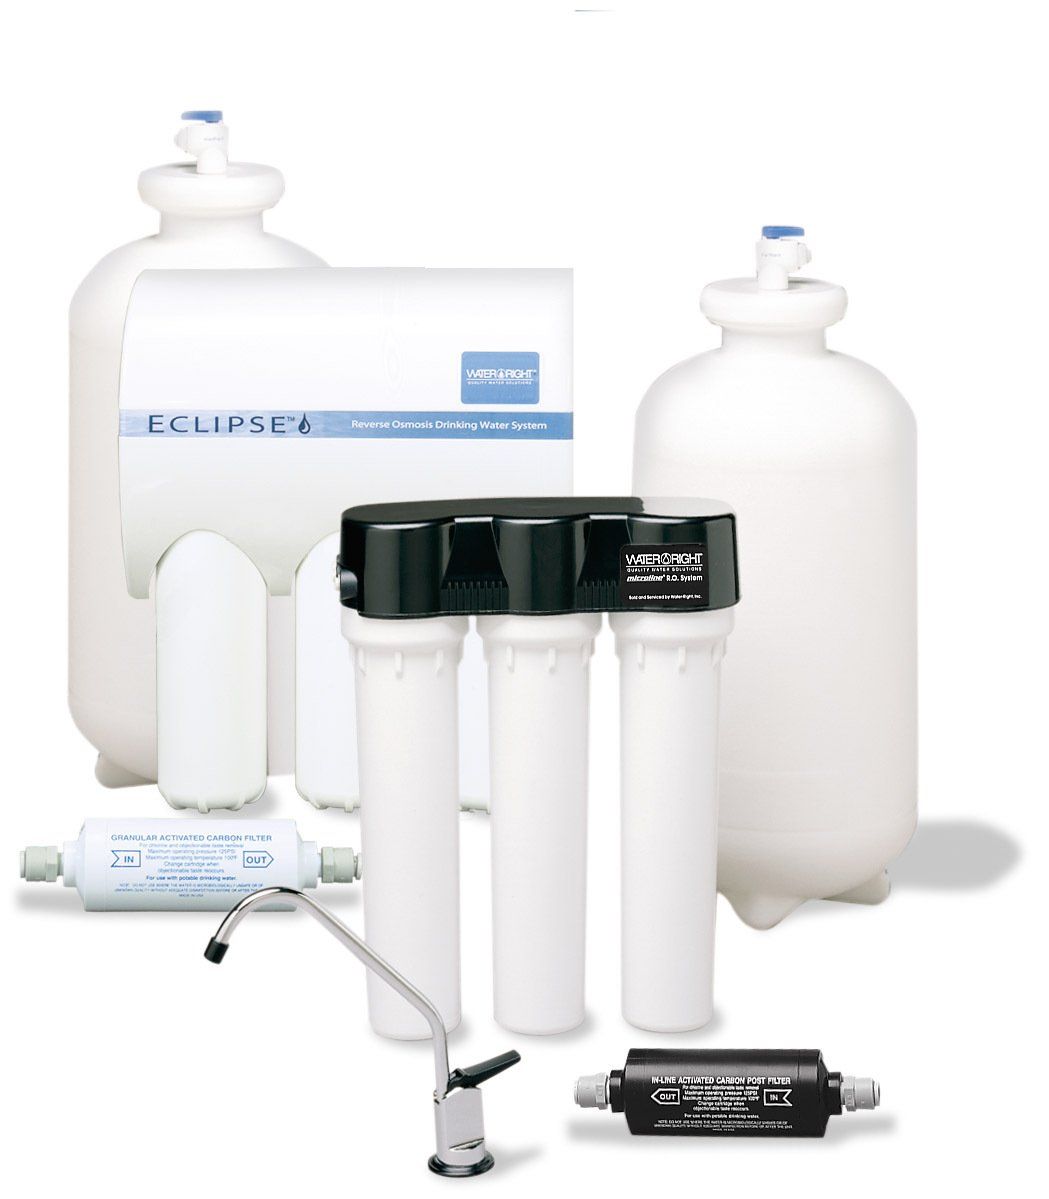 Reverse Osmosis continues to be one of the most effective methods of water treatment.